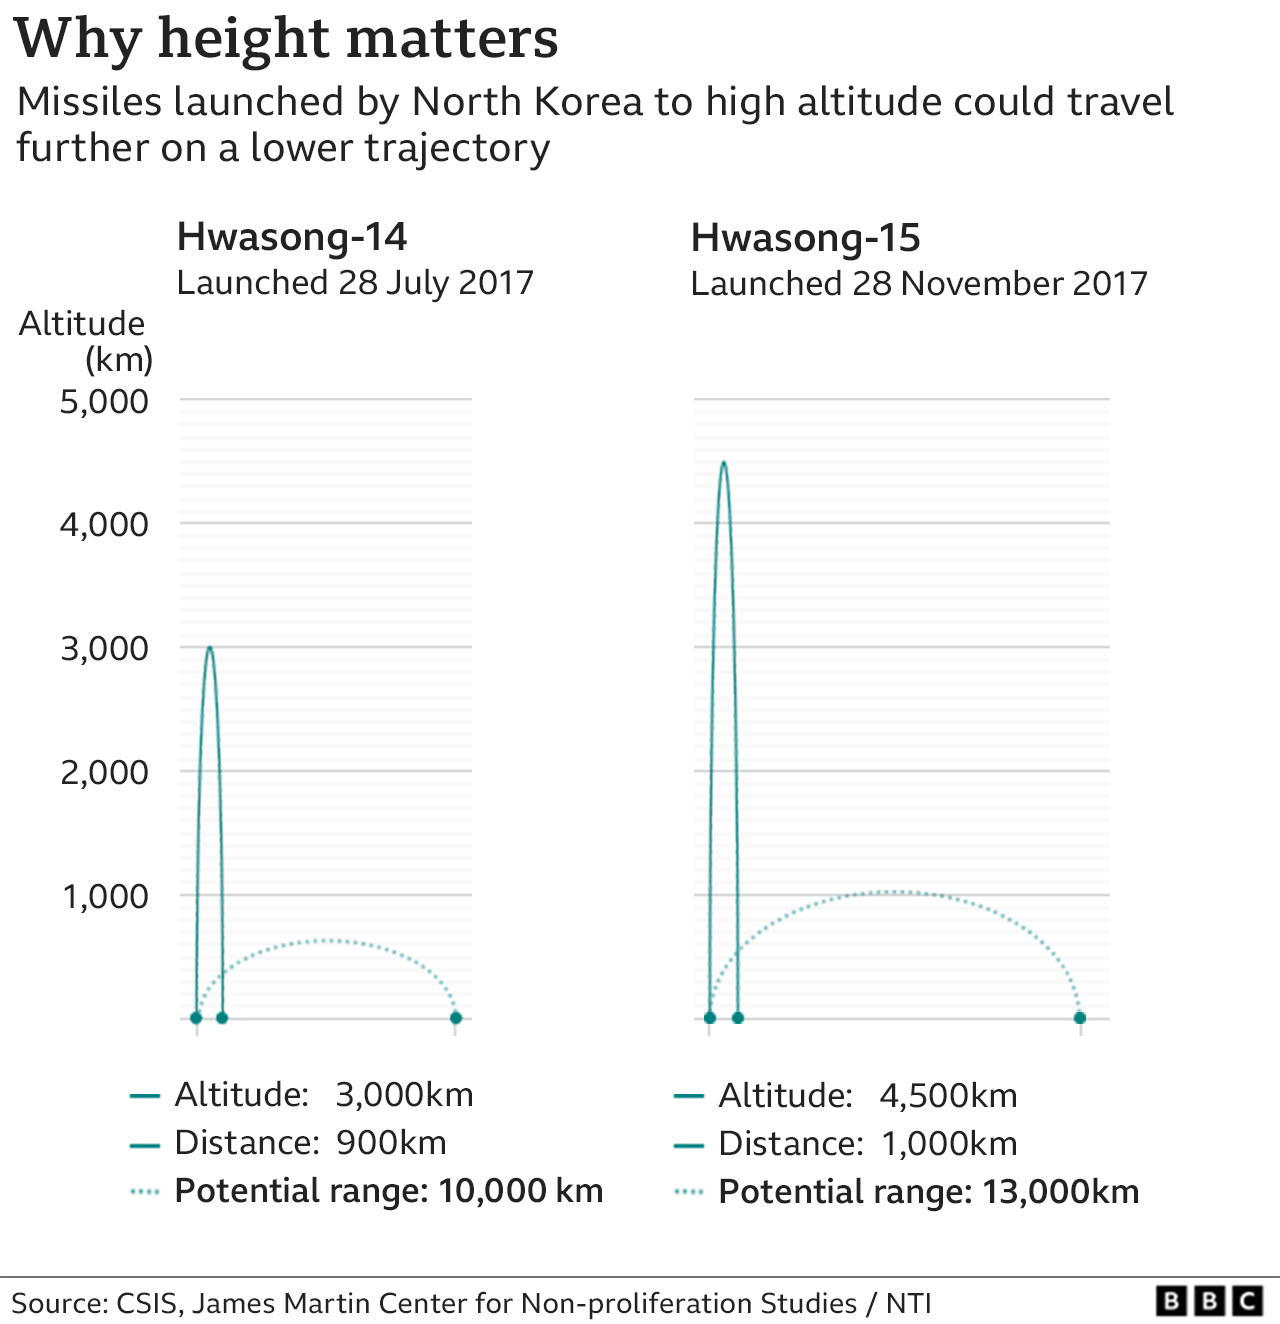 Why height matters graphic